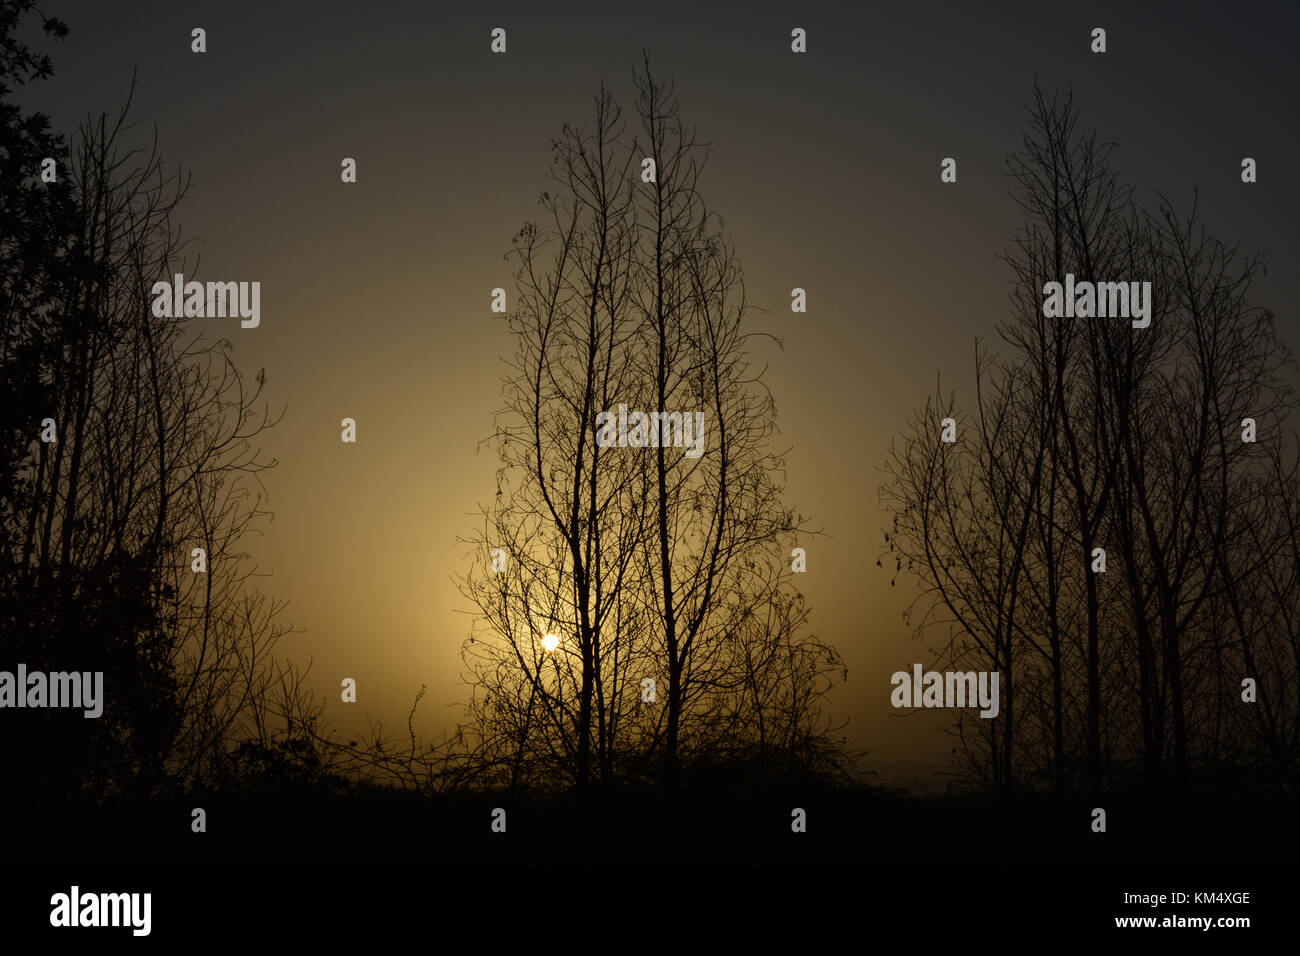 Sunrises in Saudi arabia with golden sky and silhouette trees Stock Photo